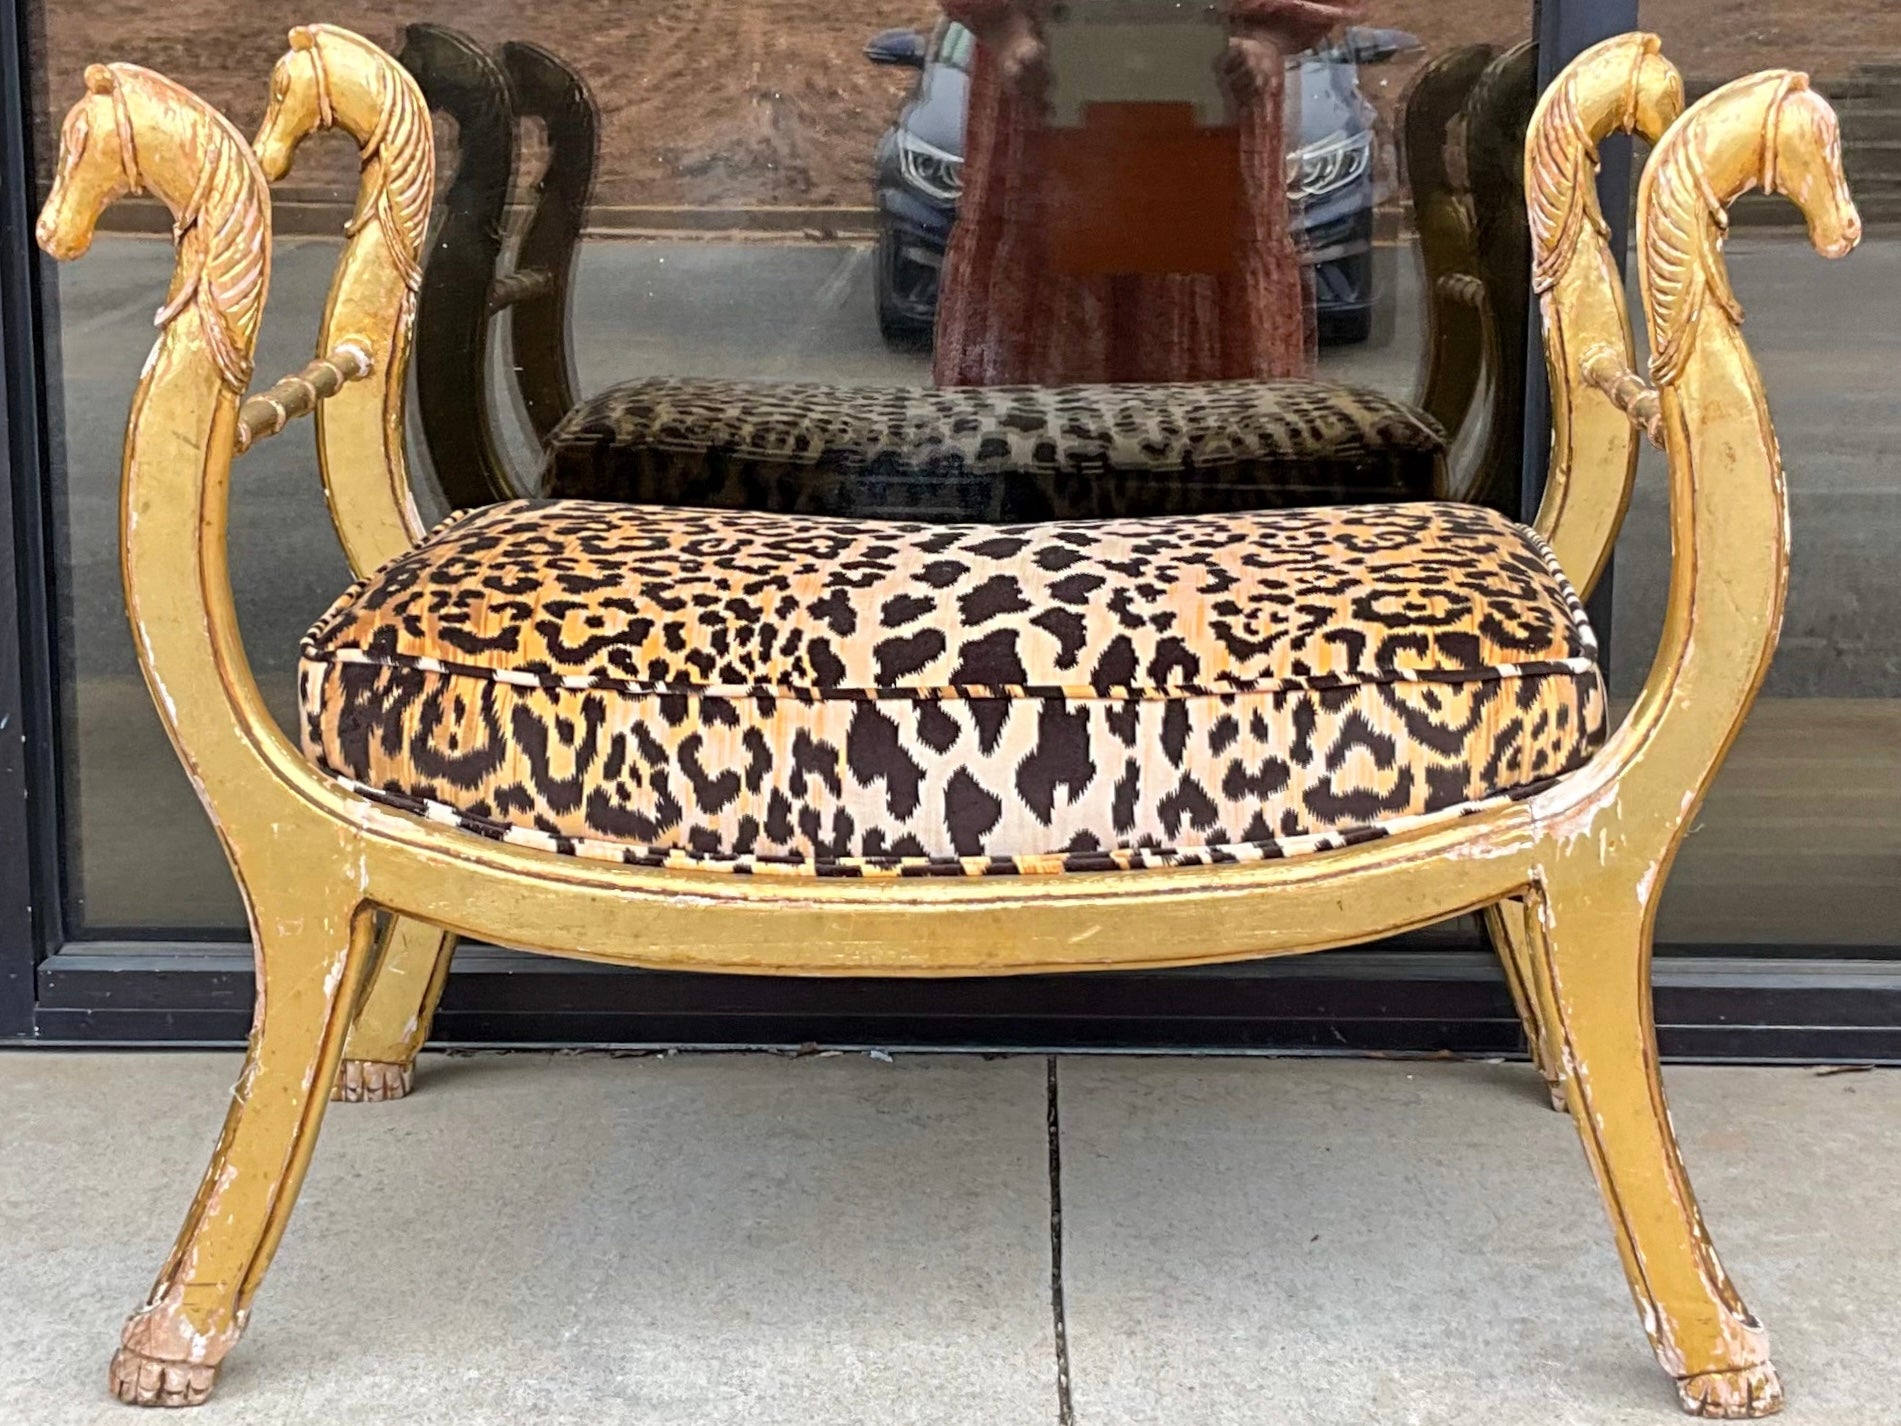 This is an antique neo-classical style Italian carved giltwood bench in the manner of Maison Jansen. The leopard velvet is new. There is chippiness to the gold leaf frame. Each arm is a carved horse. I have a second if interested in a near pair.